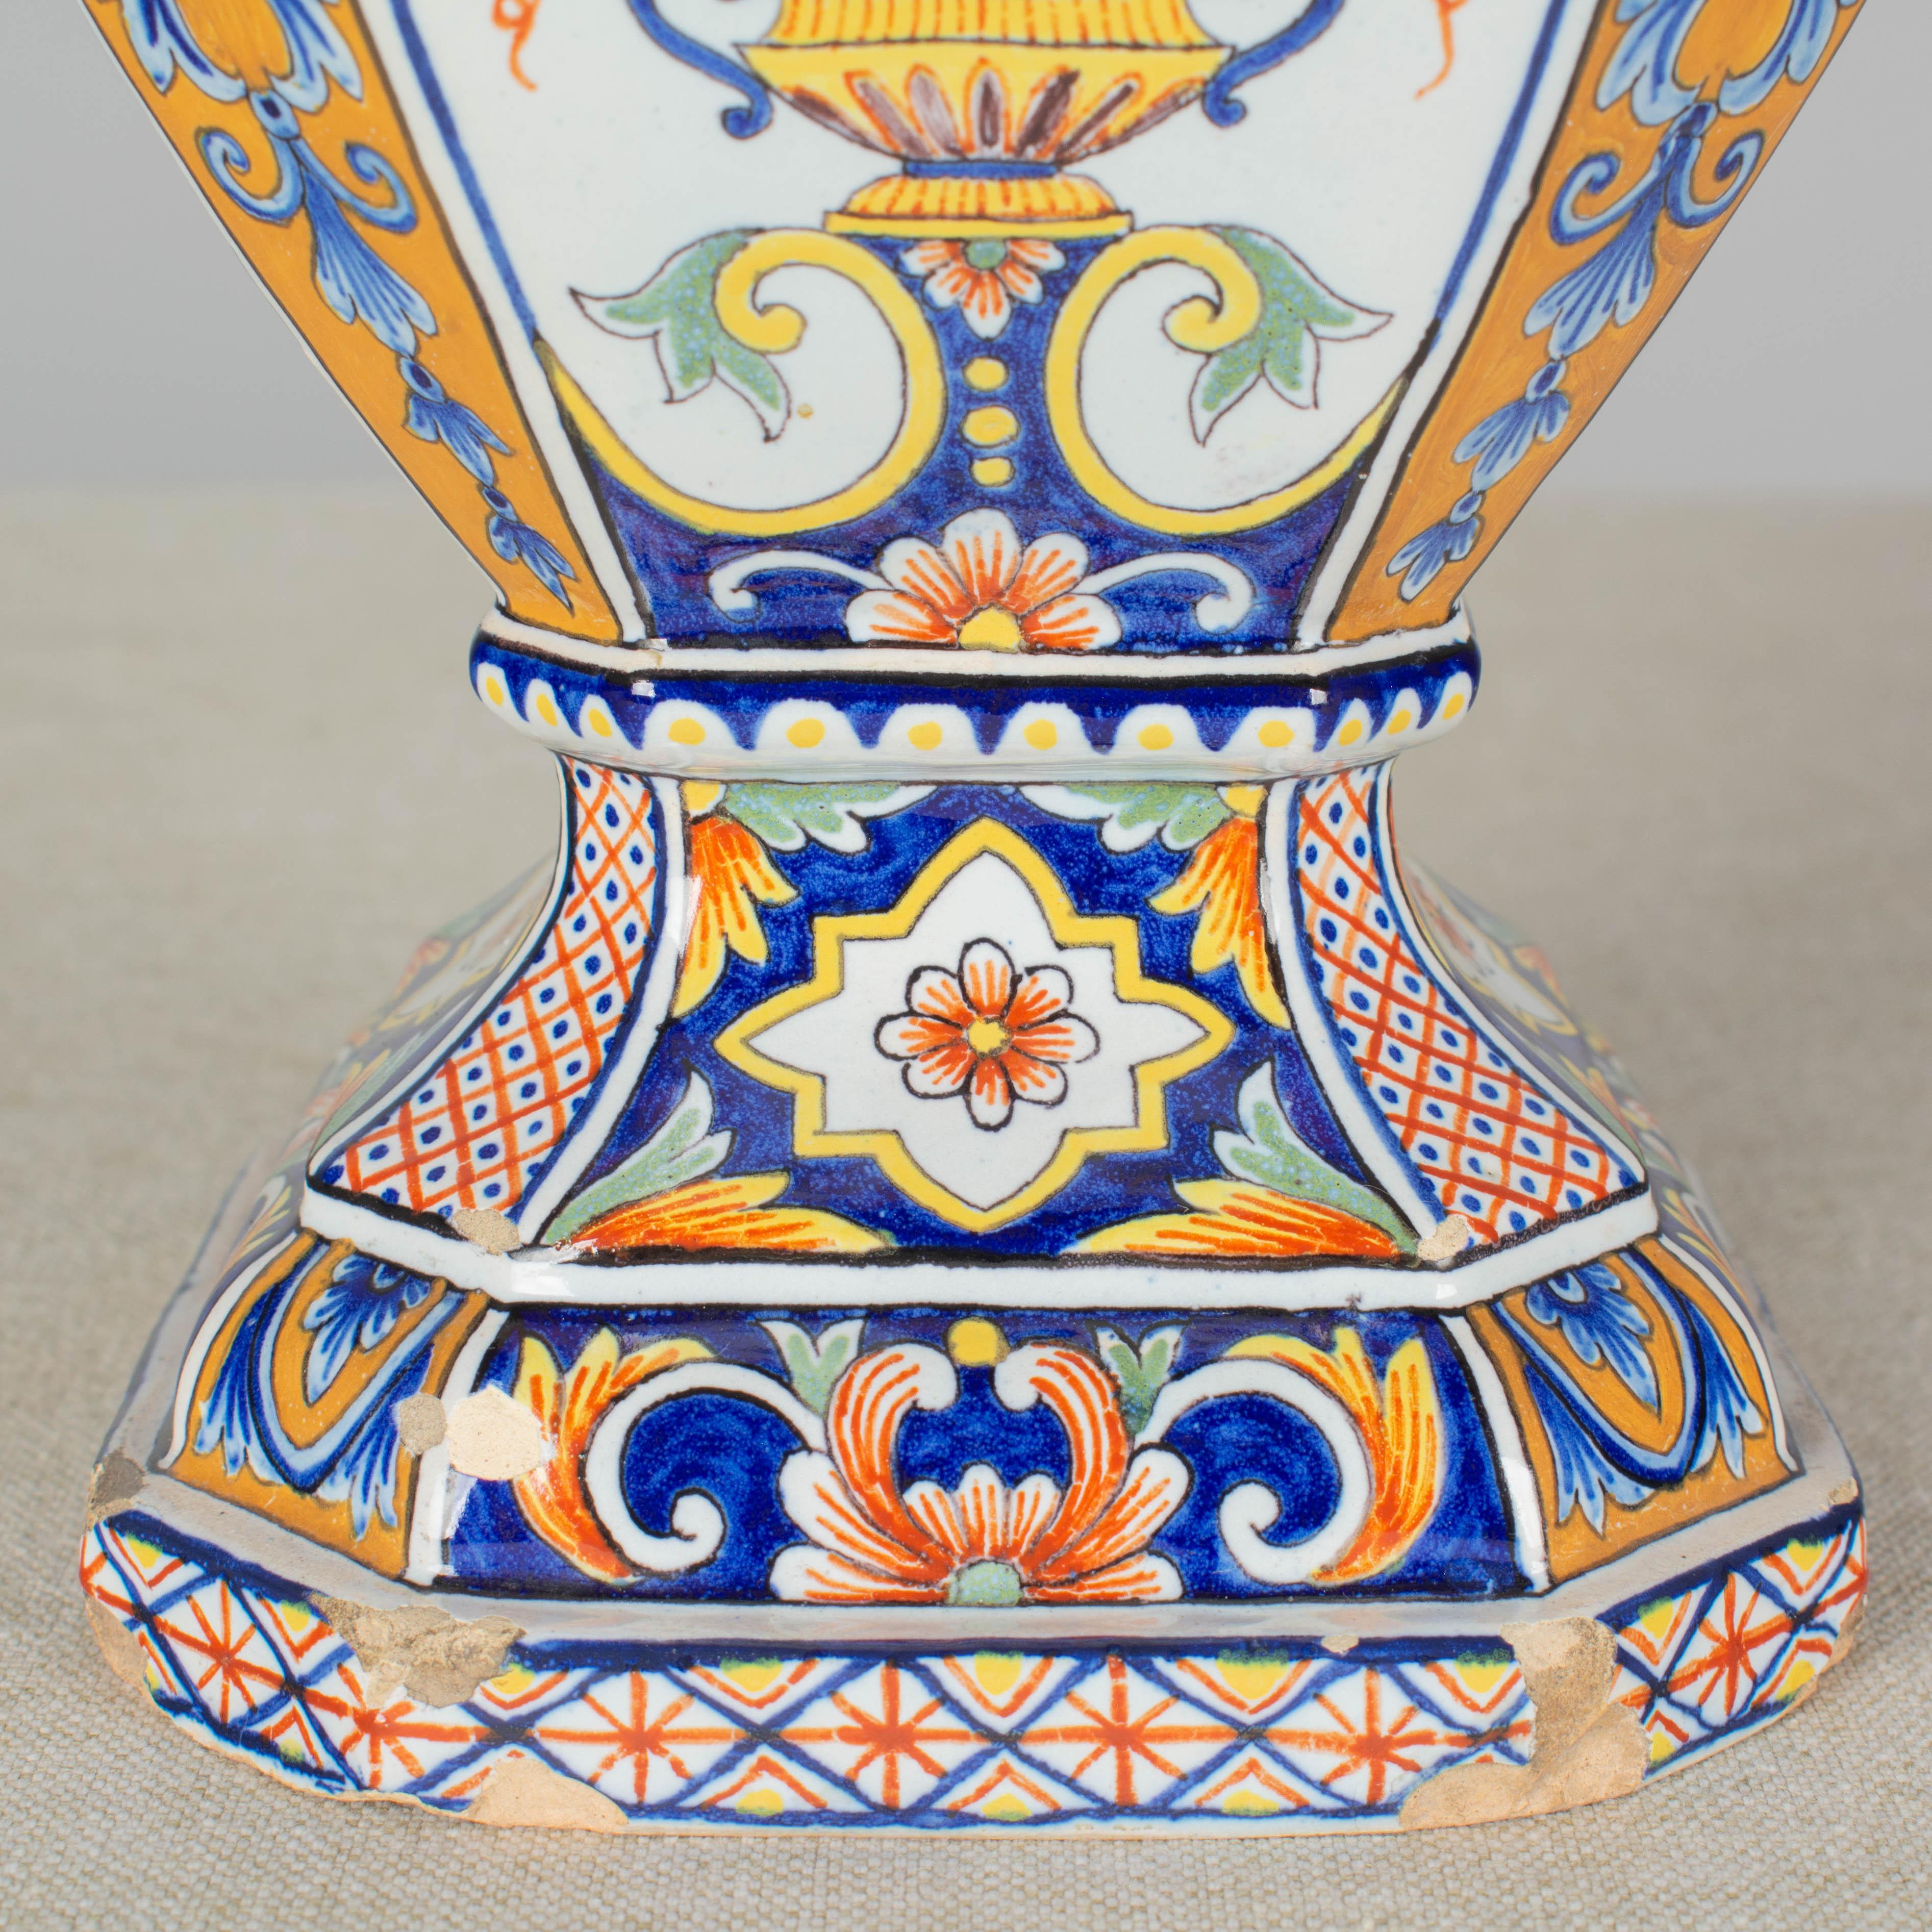 19th Century French Desvres Faience Urn Form Vases, a Pair For Sale 7